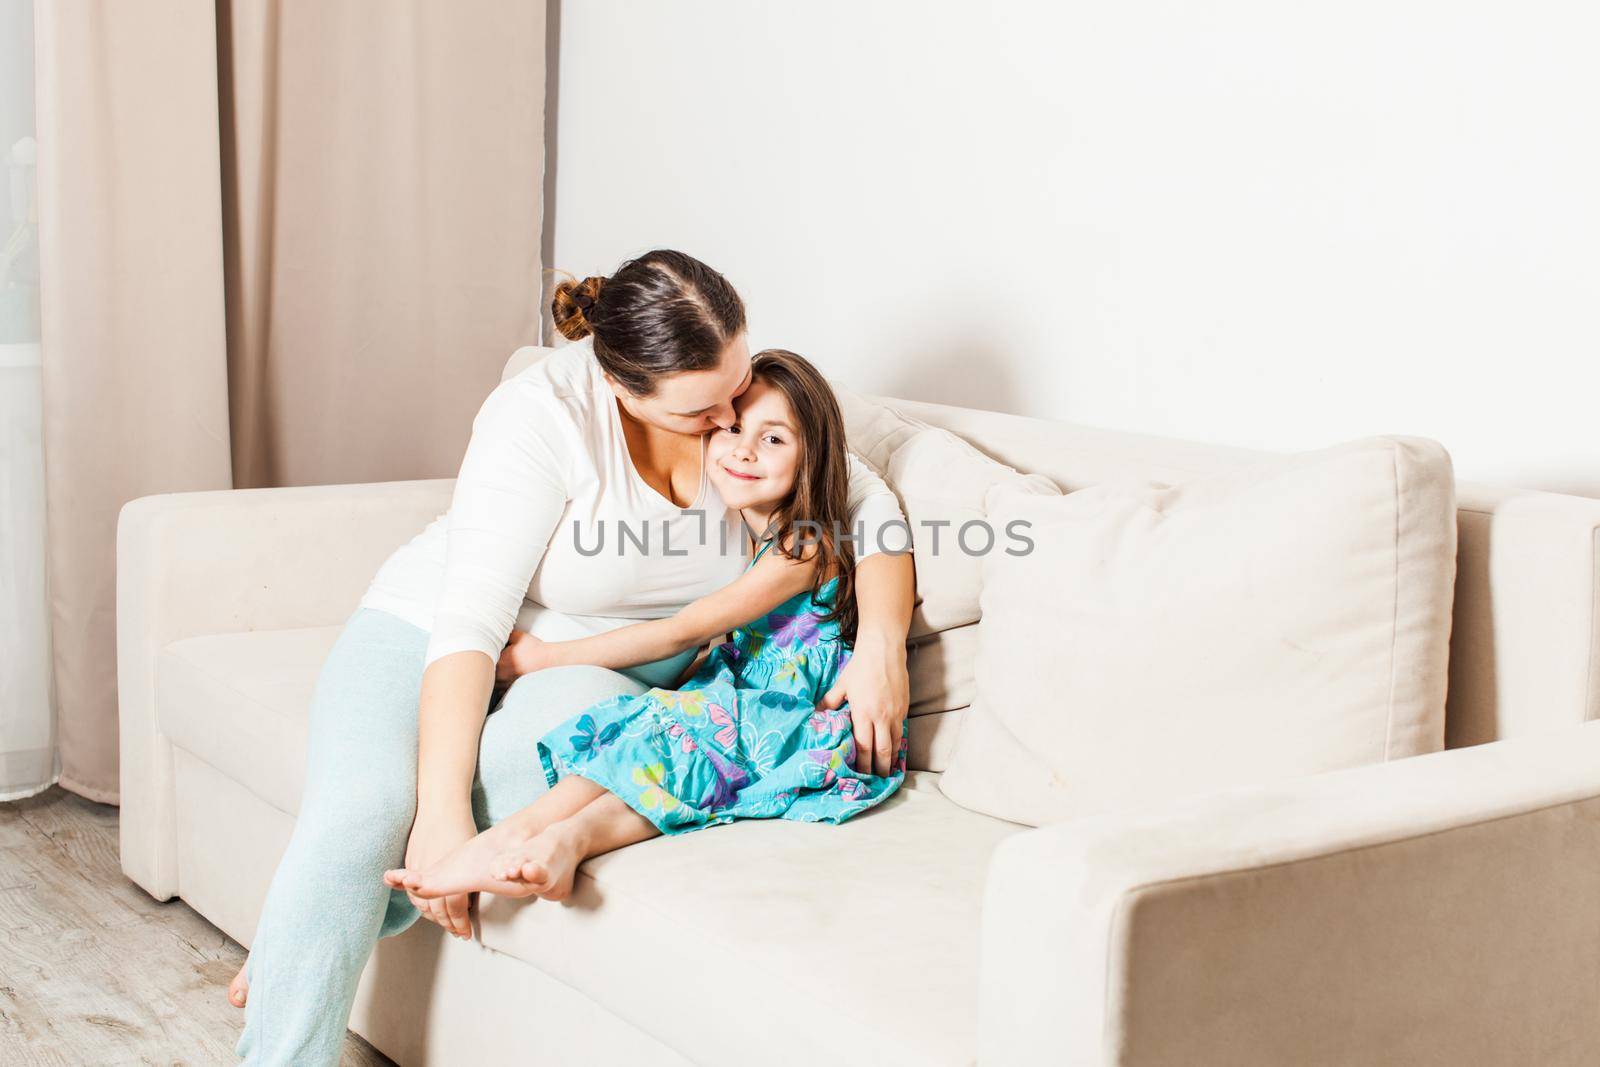 Mother and daughter at home. Mom sitting on the sofa gently hugs and kisses her smiling daughter.